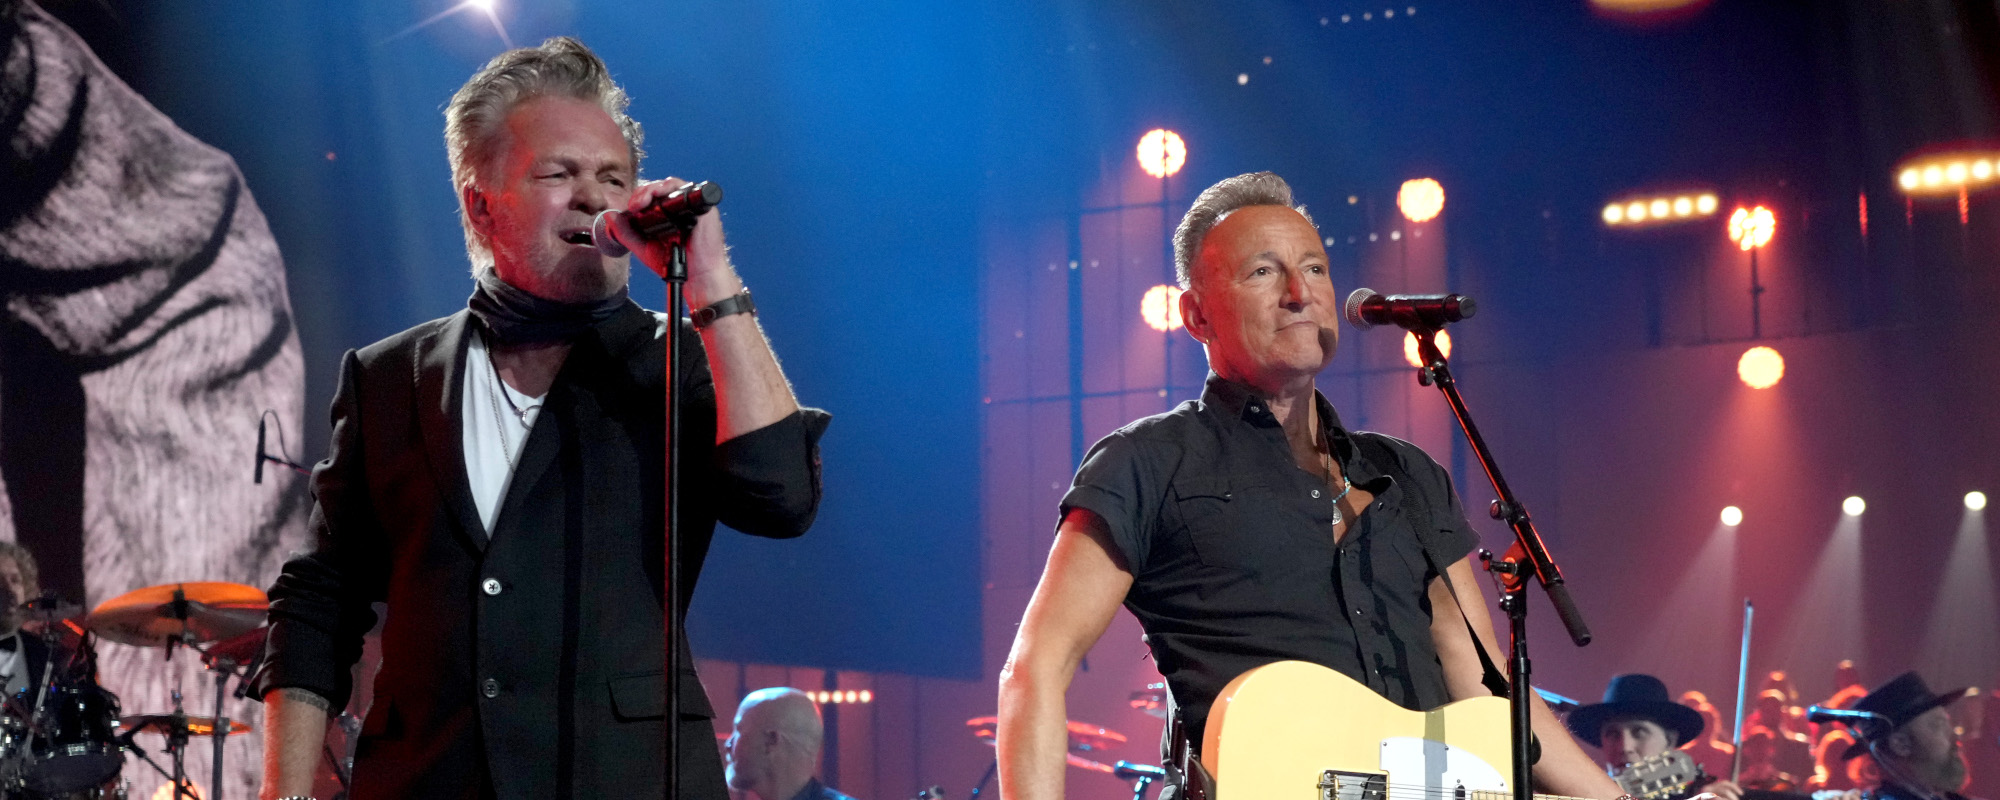 Bruce Springsteen and John Mellencamp Close Out Rock Hall Ceremony with Jerry Lee Lewis Tribute